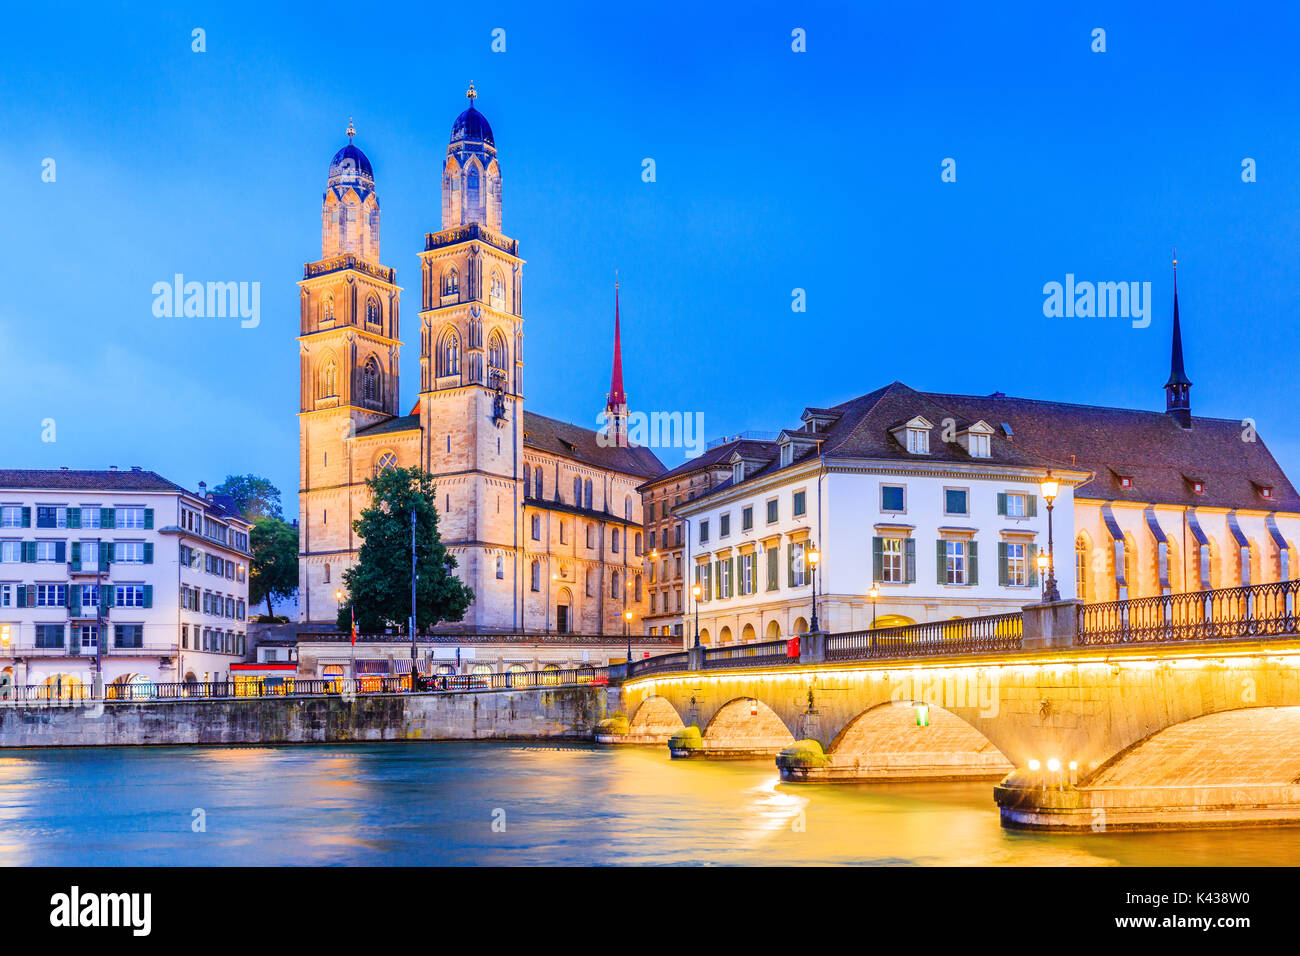 Zurich, Switzerland. View of the historic city center with famous Grossmunster Church, on the Limmat river. Stock Photo